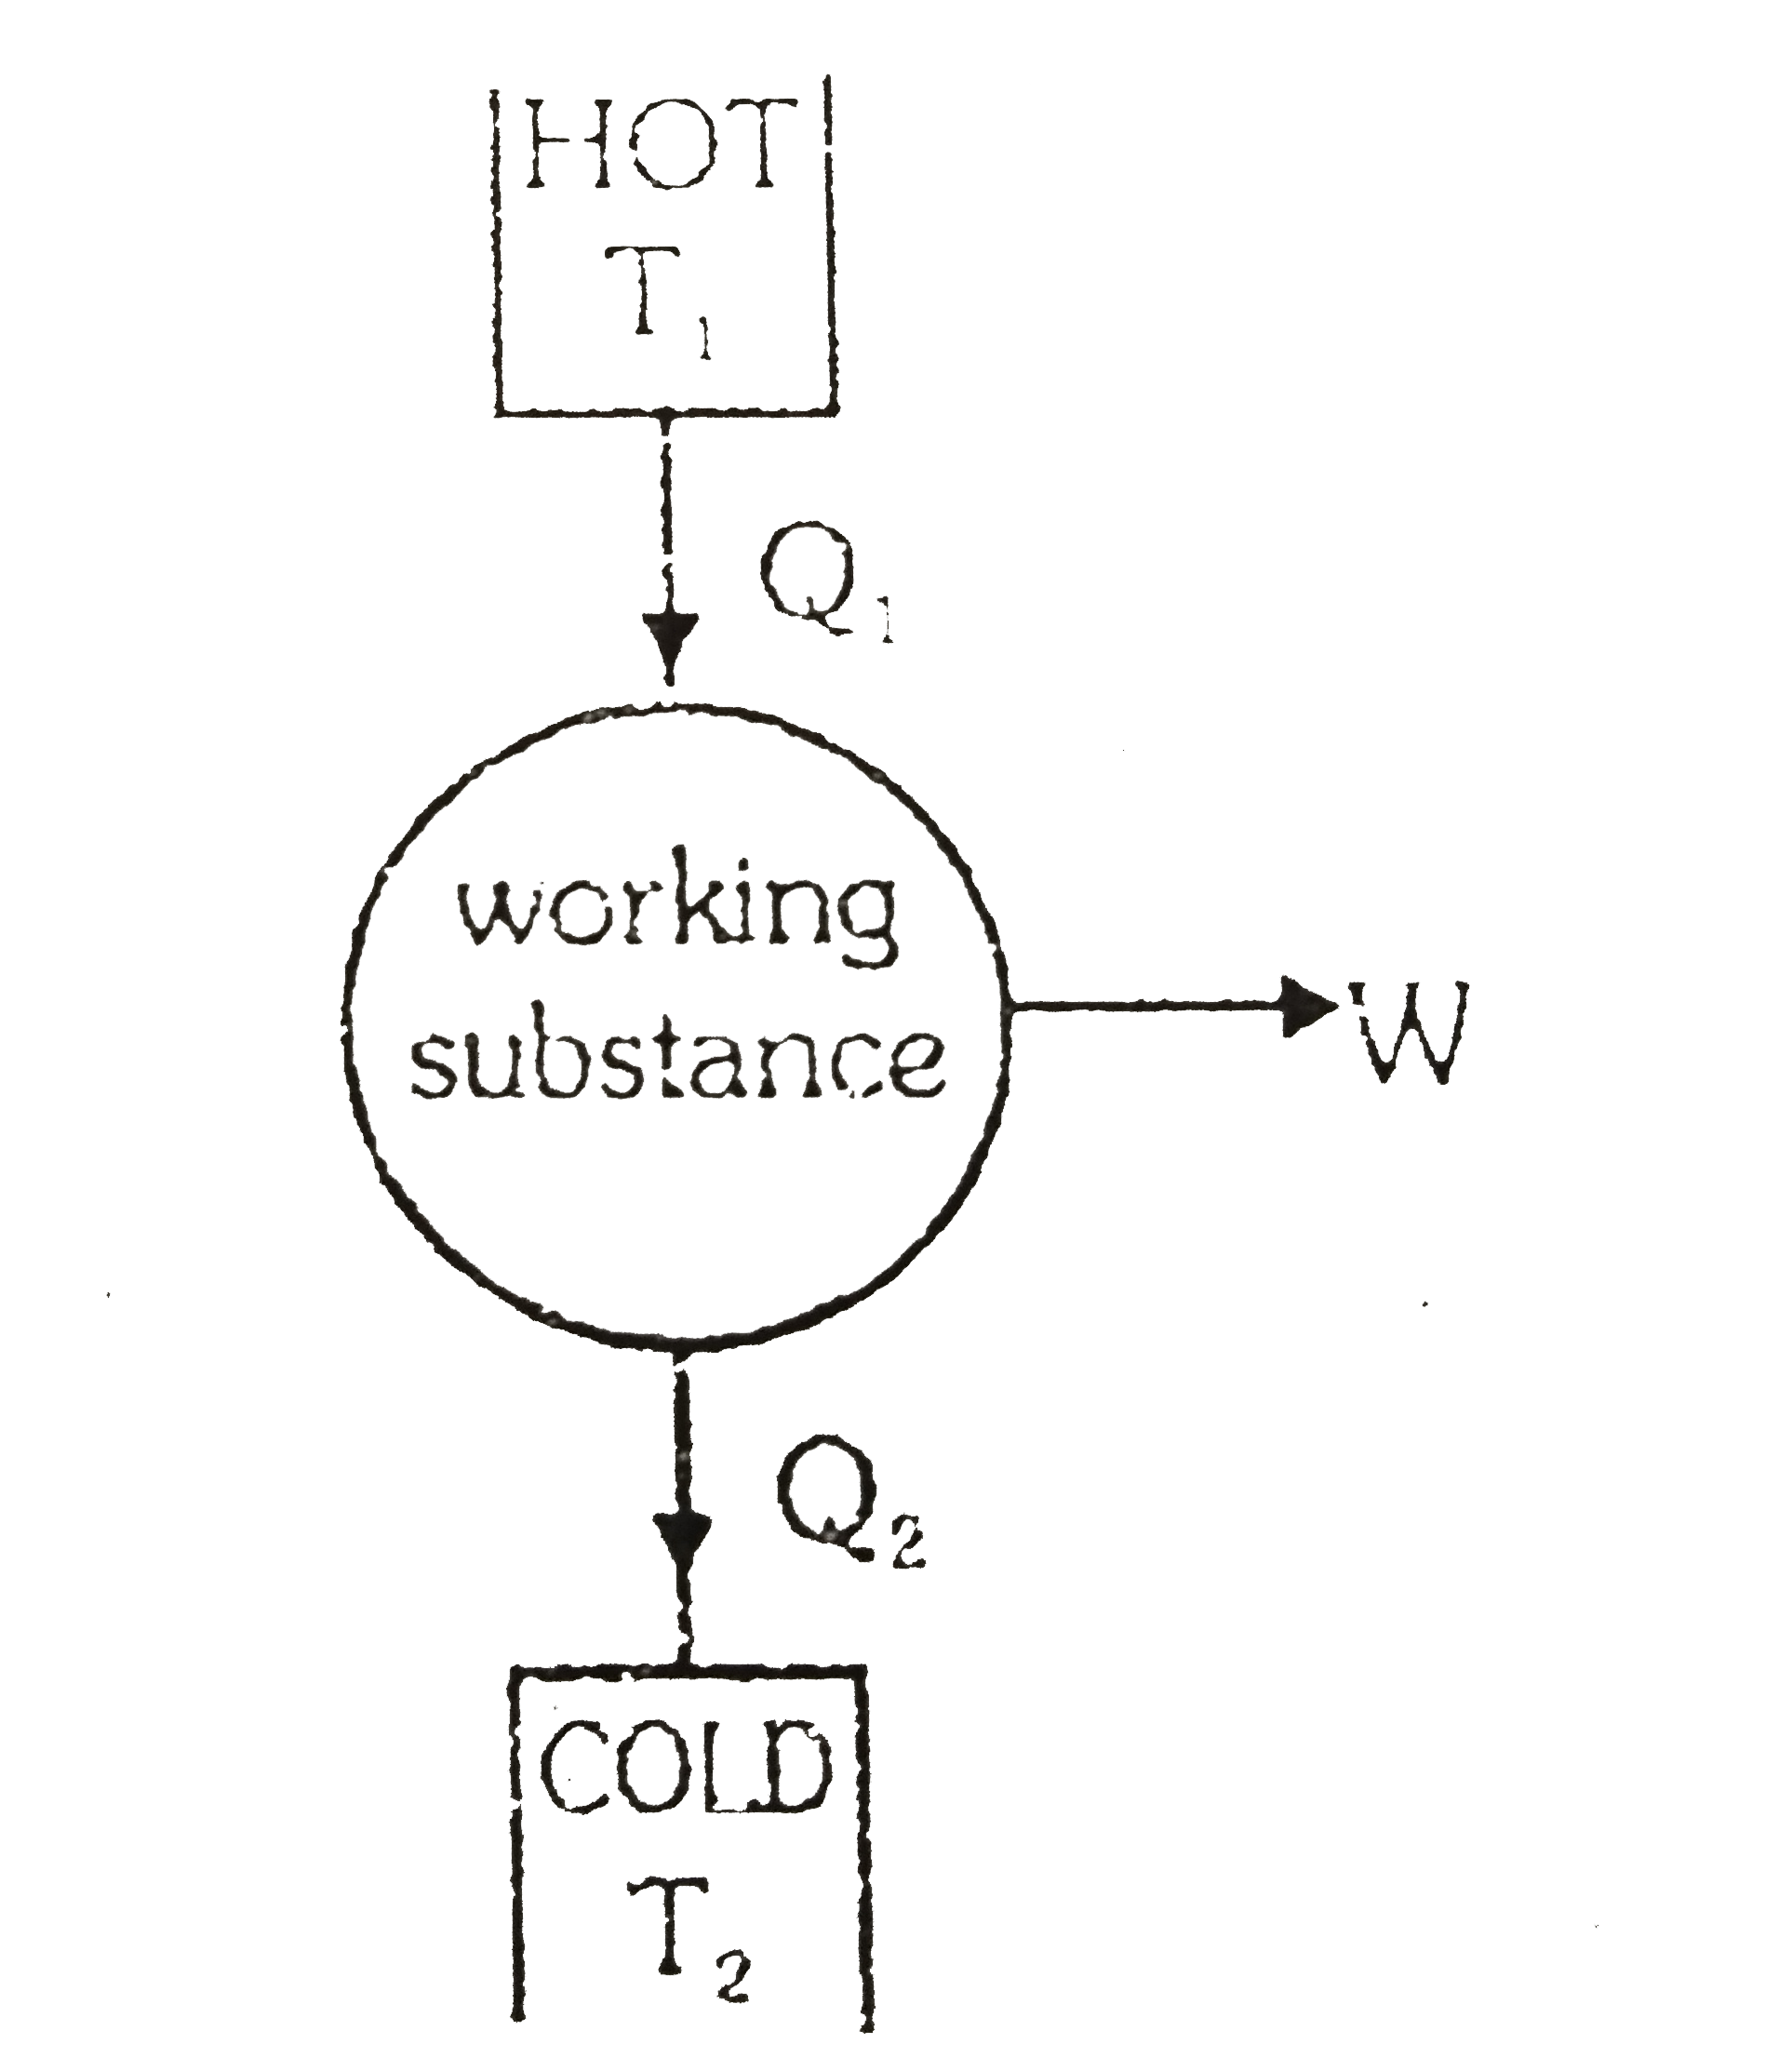 The efficiency of a heat engine is defined as the ratio of the mechanical work done by the engine in one cycle to the heat absorbed from the high temperature source . eta = (W)/(Q(1)) = (Q(1) - Q(2))/(Q(1)) Cornot devised an ideal engine which is based on a reversible cycle of four operations in succession: isothermal expansion , adiabatic expansion. isothermal compression and adiabatic compression.      For carnot cycle (Q(1))/(T(1)) = (Q(2))/(T(2)). Thus eta = (Q(1) - Q(2))/(Q(1)) = (T(1) - T(2))/(T(1))  According to carnot theorem